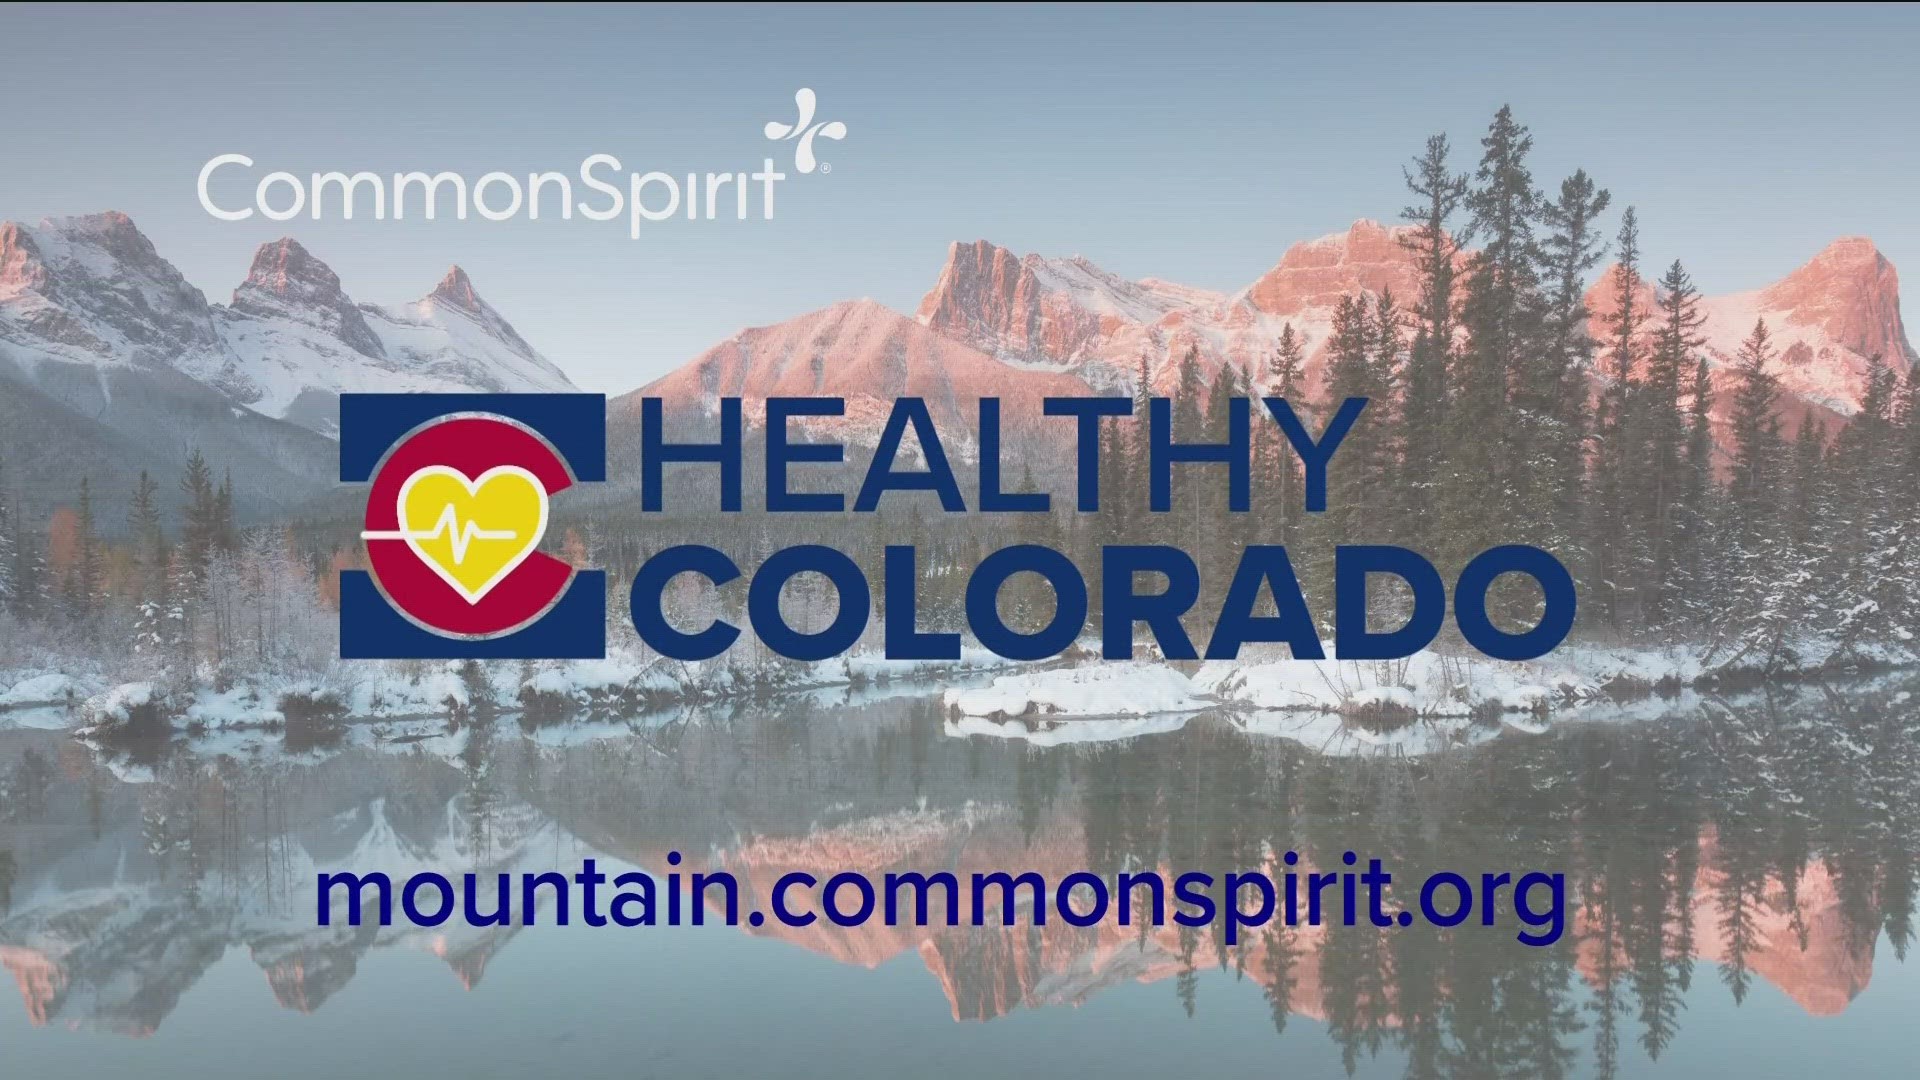 Human Kindness is what CommonSpirit Health is all about. Learn more about their doctors and medical teams in your area at Mountain.CommonSpirit.org. **PAID CONTENT**